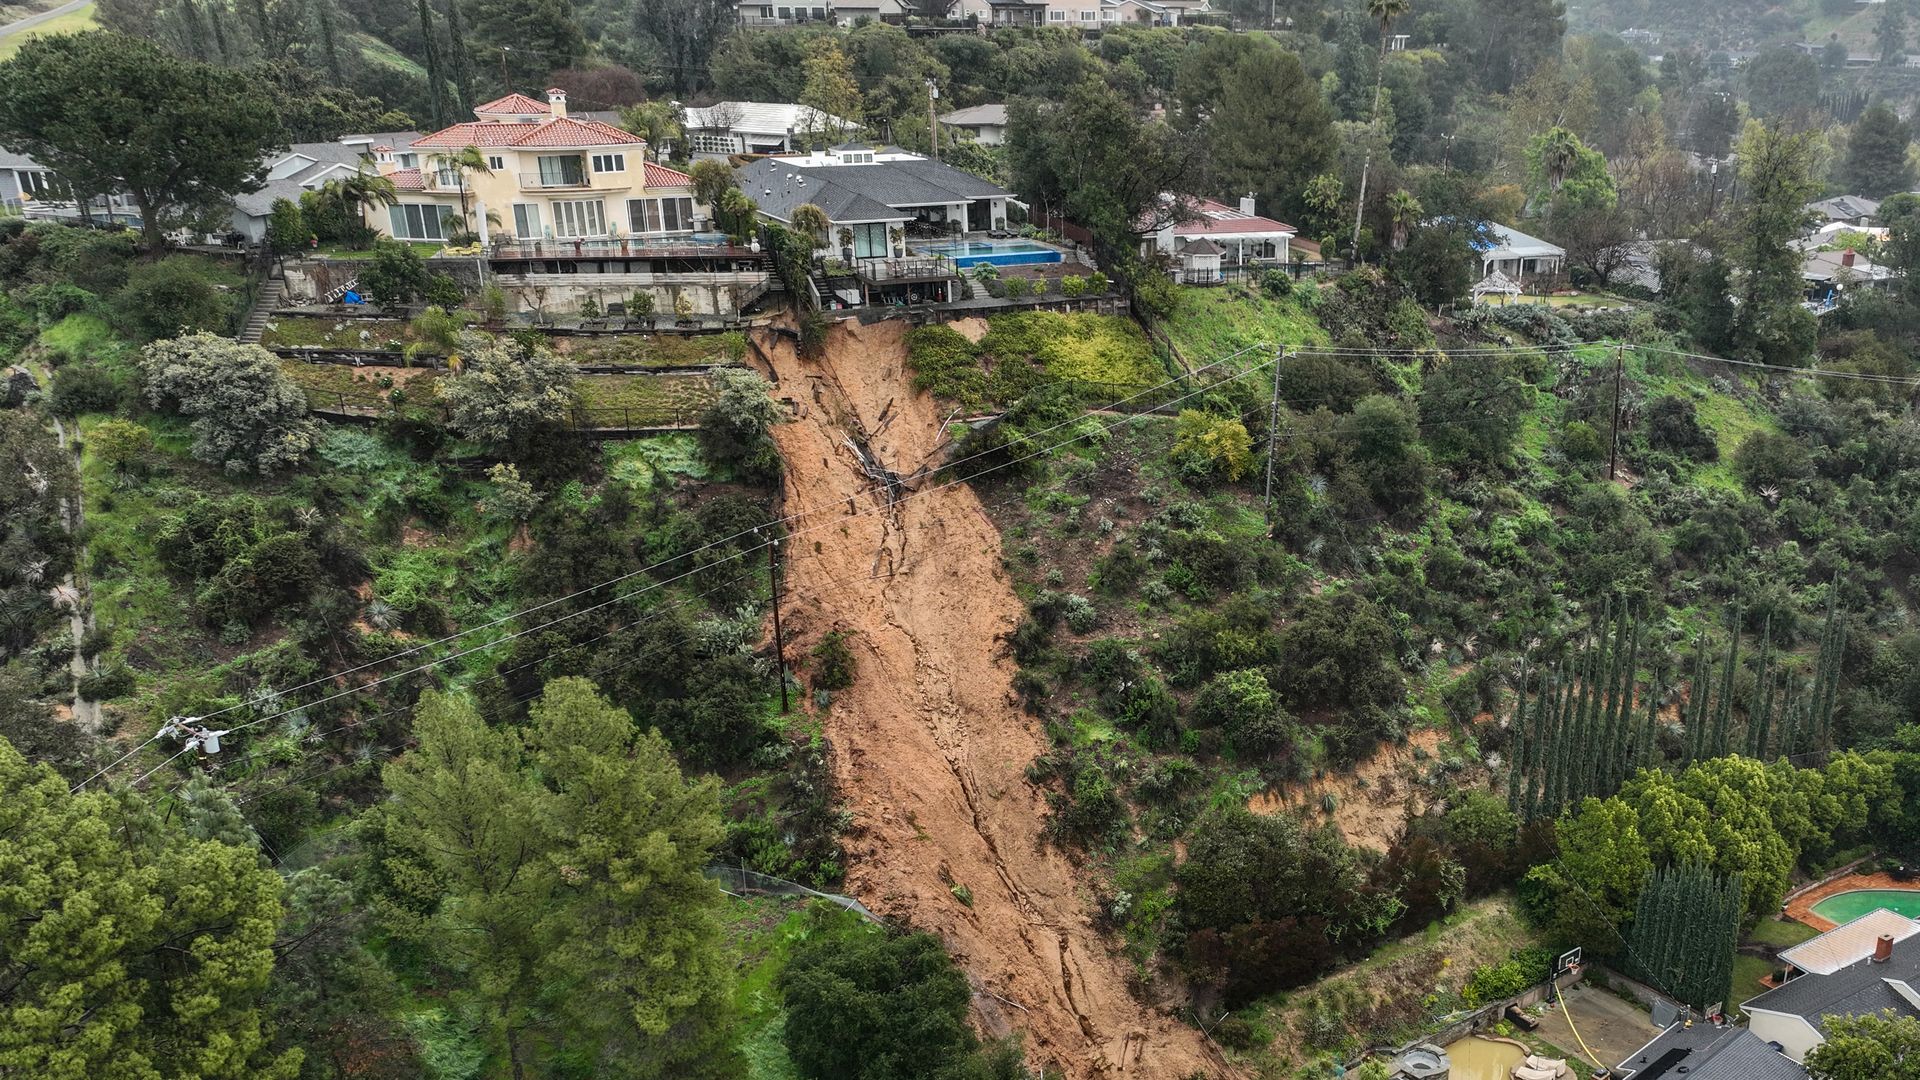 Homes in La Cañada Flintridge in Los Angeles County on Monday that were damaged in a mudslide that crashed down onto the properties following relentless rain. 